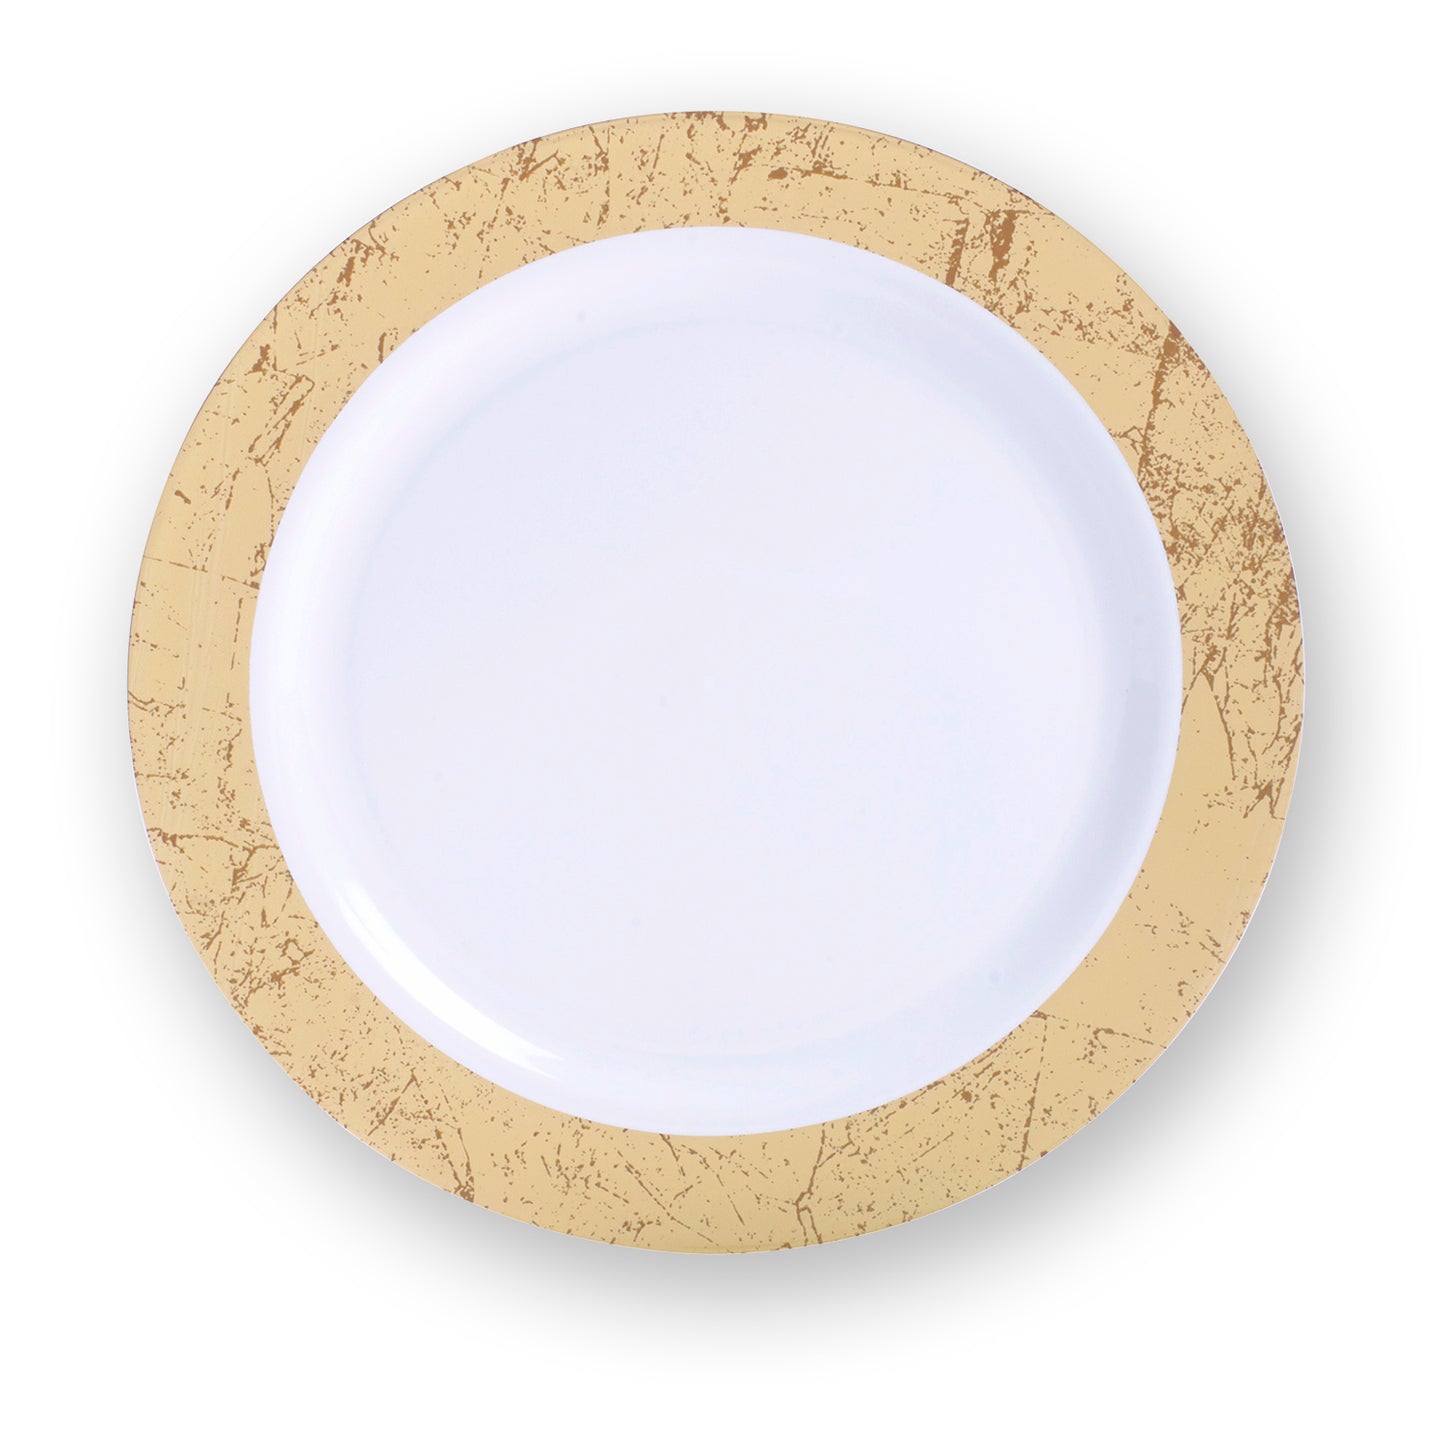 100 plates total - 50 plastic dinner plates and 50 plastic salad plates- gold marble design